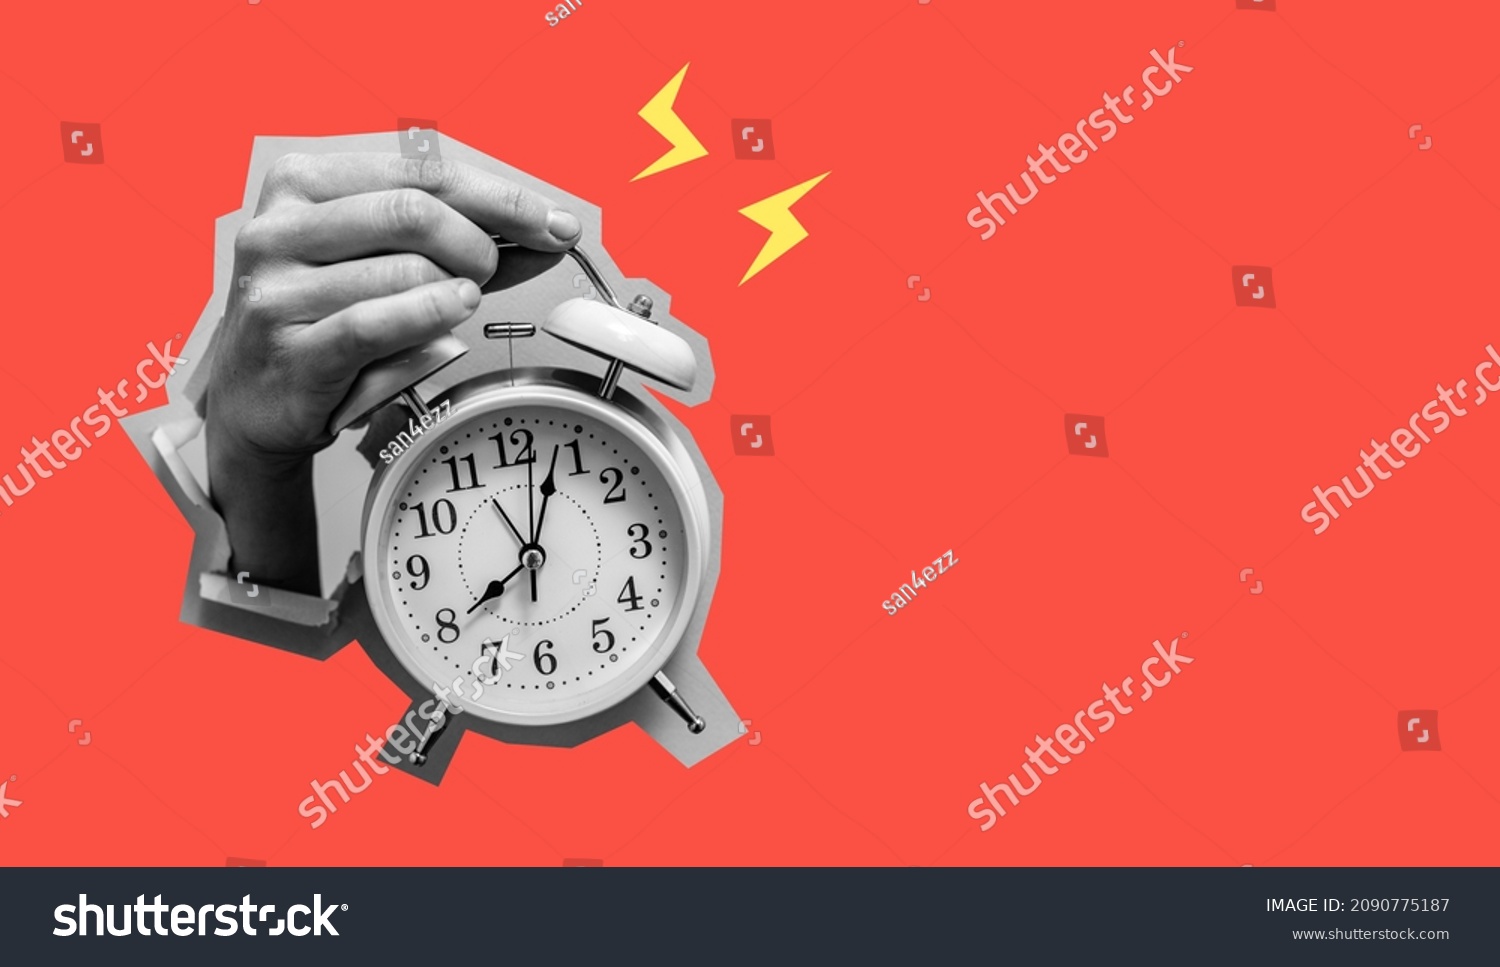 Female hand holding alarm clock through paper background. Inspiration, idea concept, trendy magazine style. art collage. It's time #2090775187